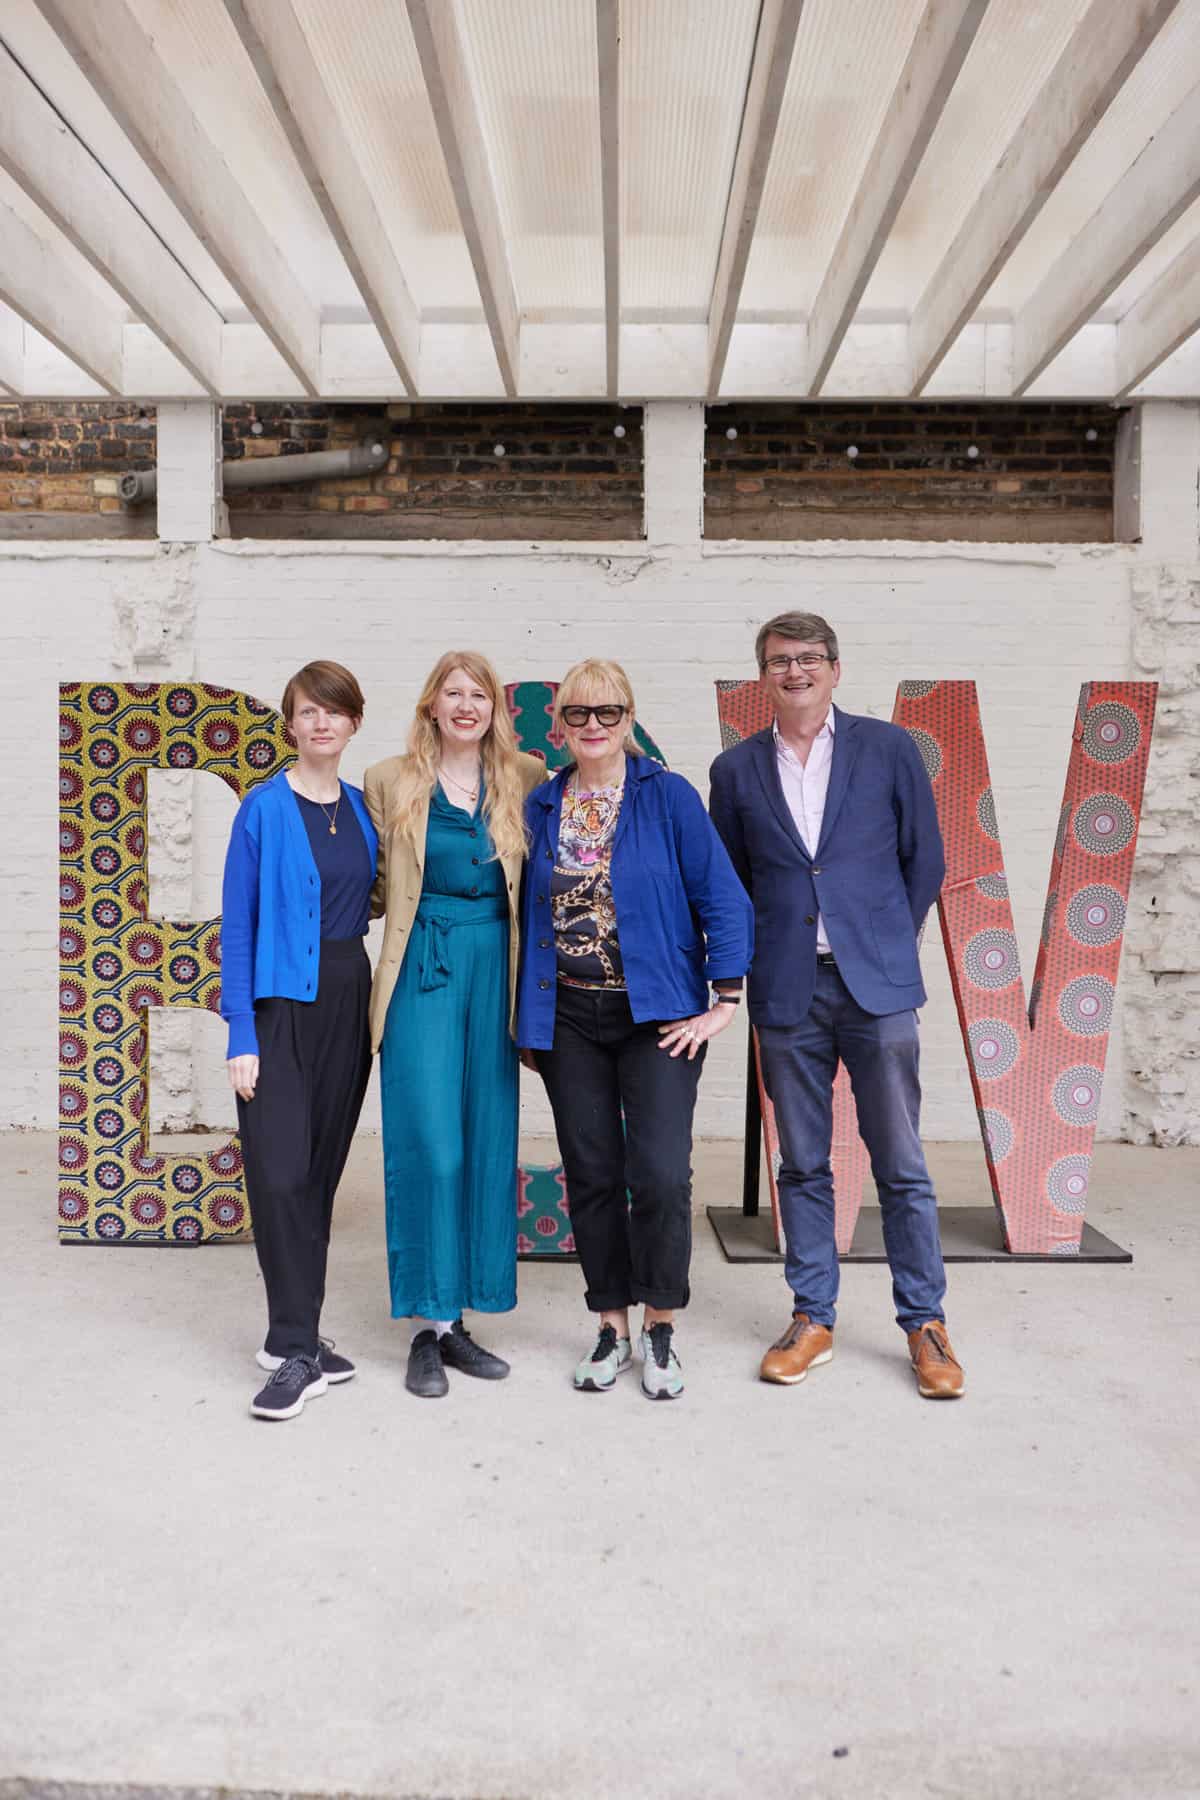 New East London Art Prize launched